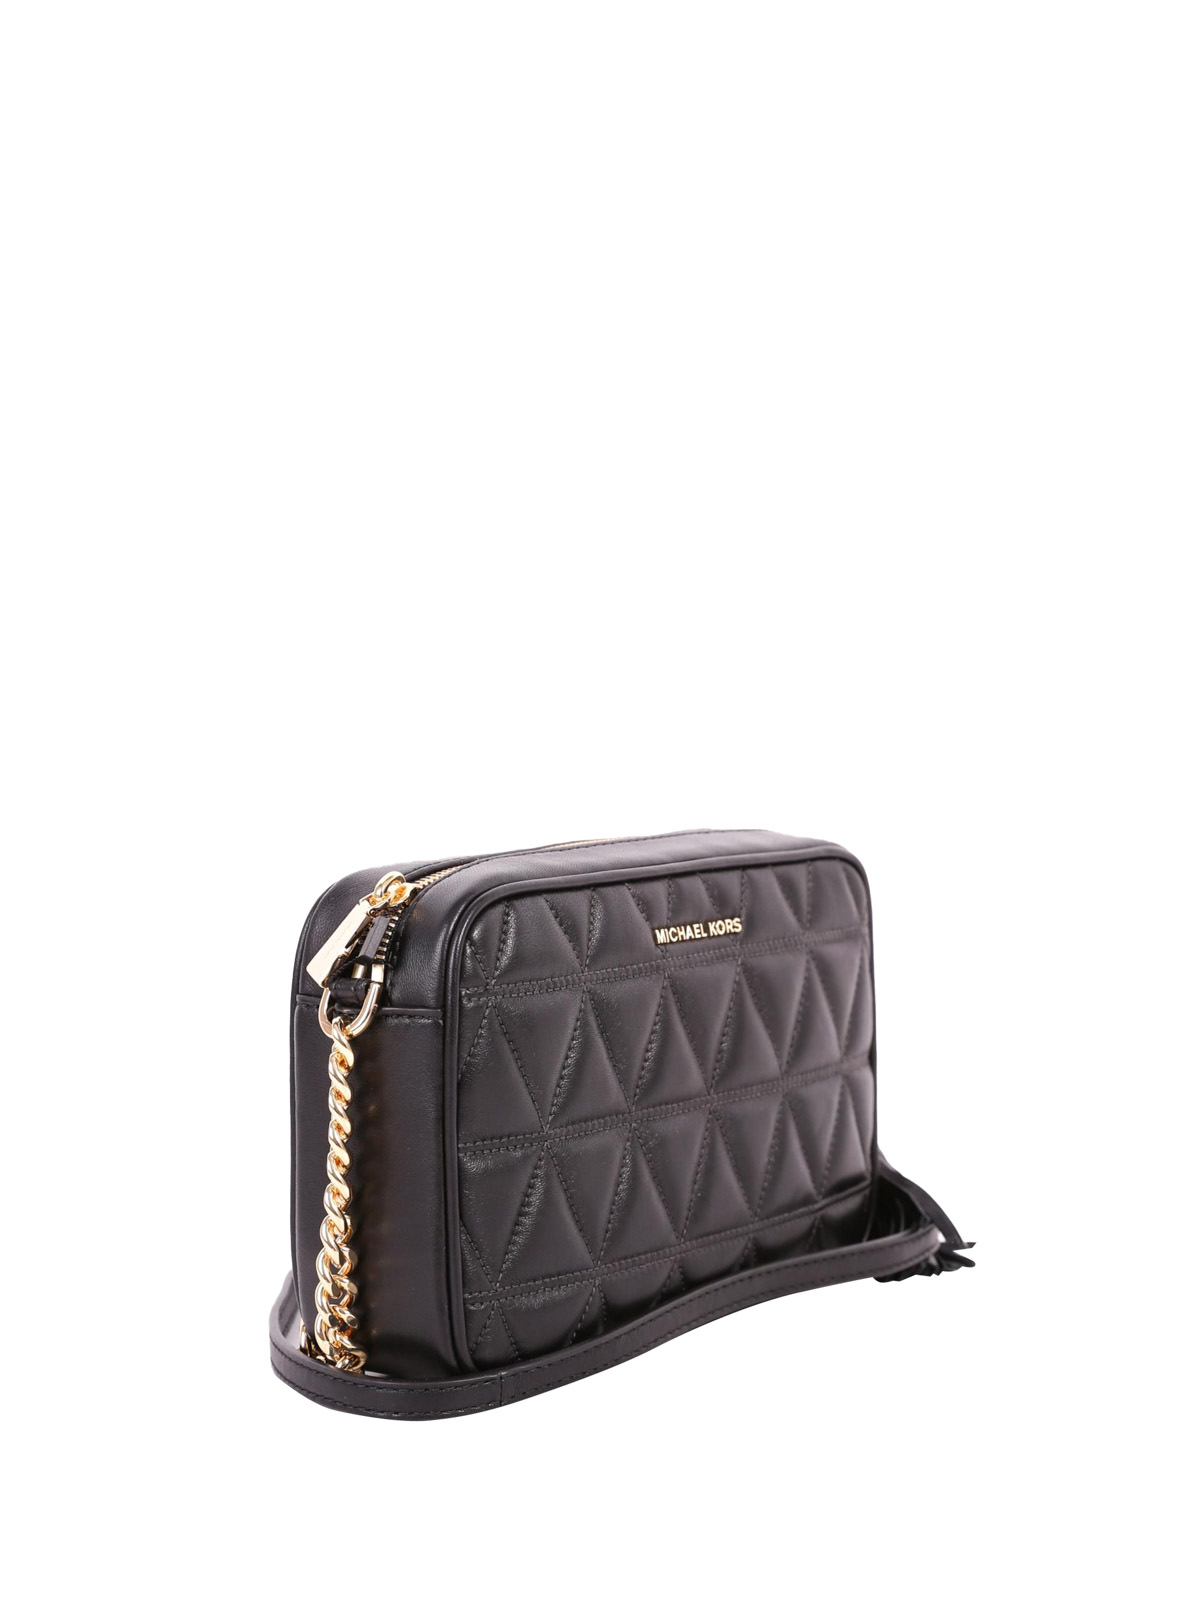 Michael Kors Black Quilted Leather Ginny Camera Crossbody Bag